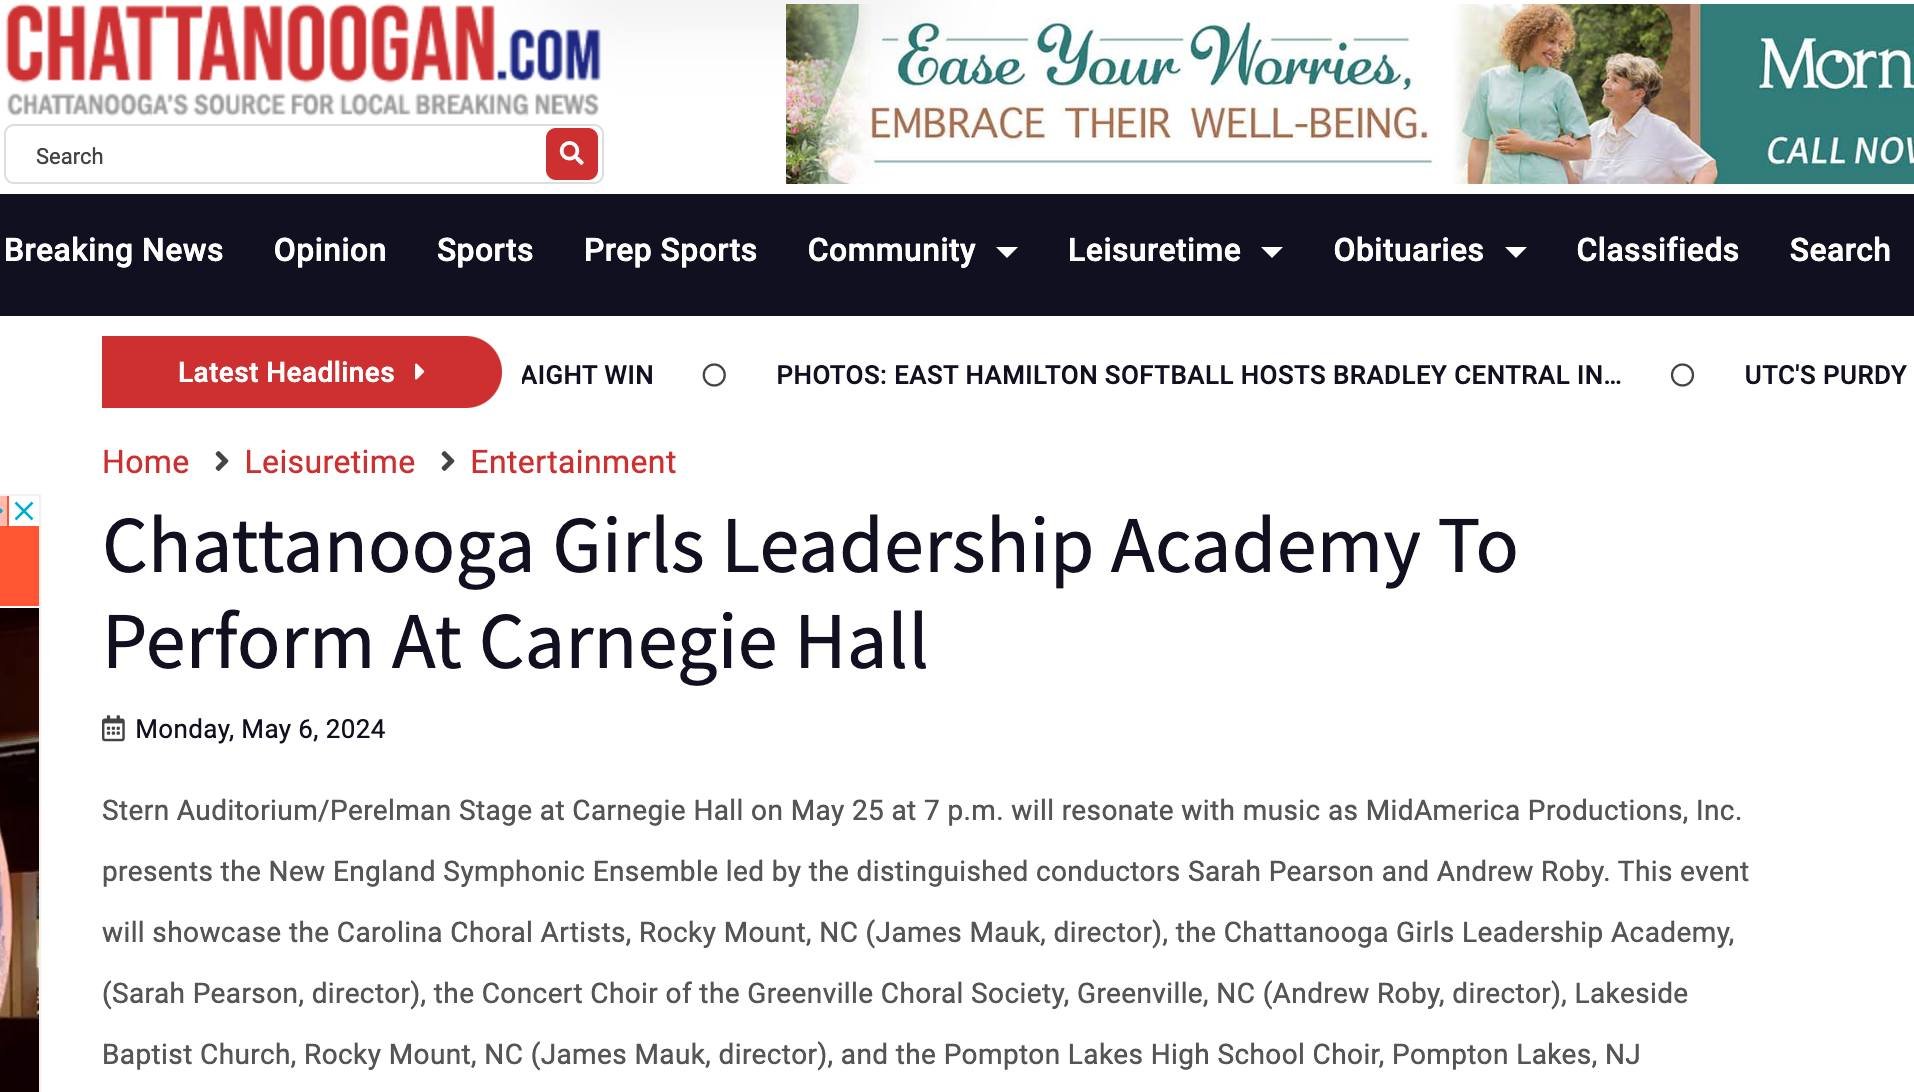 Shout out to @thechattanoogan for sharing @cgla_chatt upcoming performance at @carnegiehall on Saturday, May 25th.

Tickets still available!

#Linkinbio #chattanooga #onthemap2024